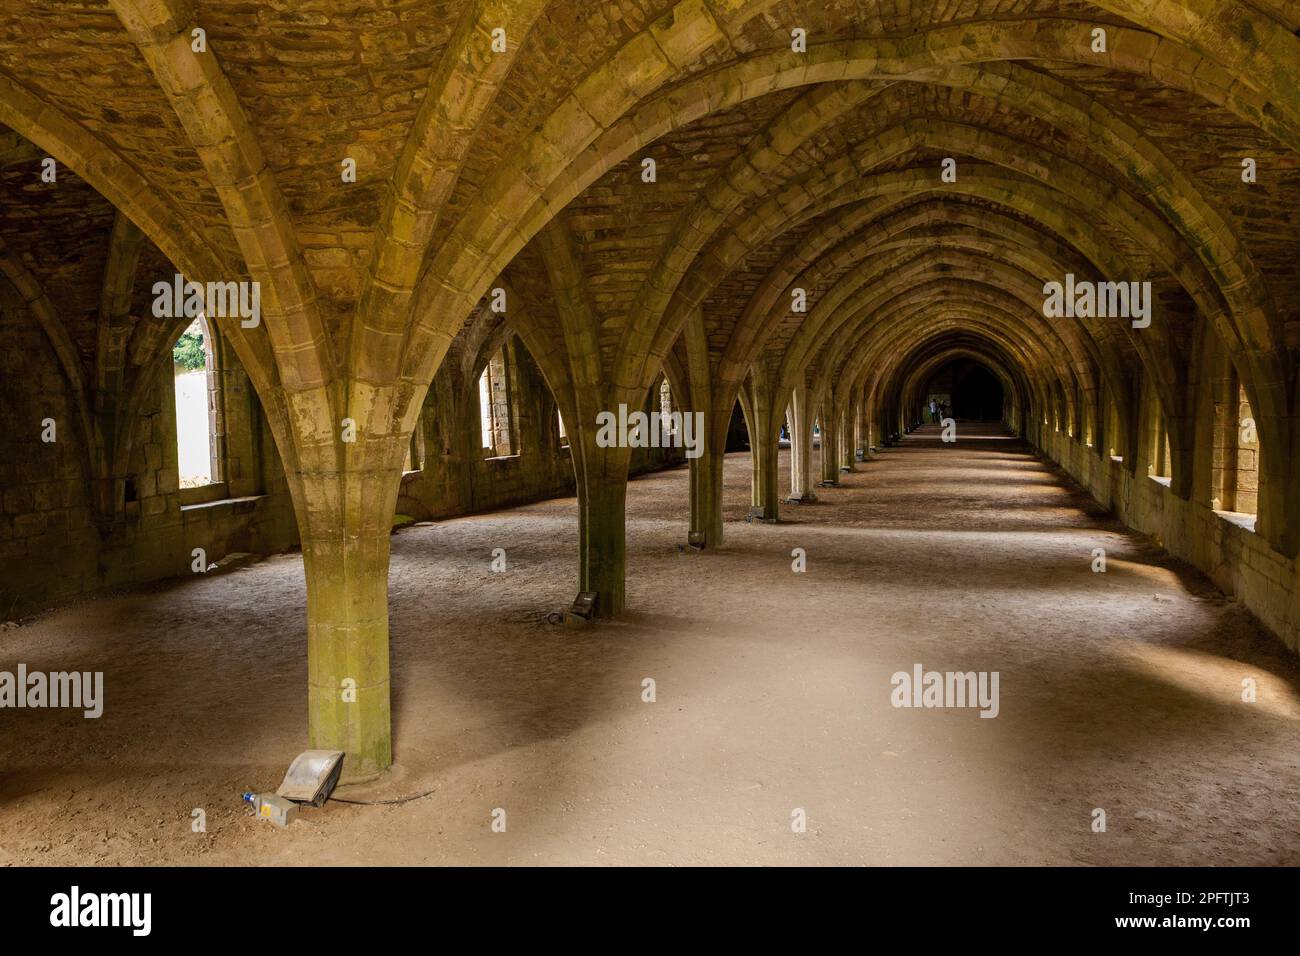 Fountains Abbey UNESCO World Heritage Site, Yorkshire, Great Britain Stock Photo